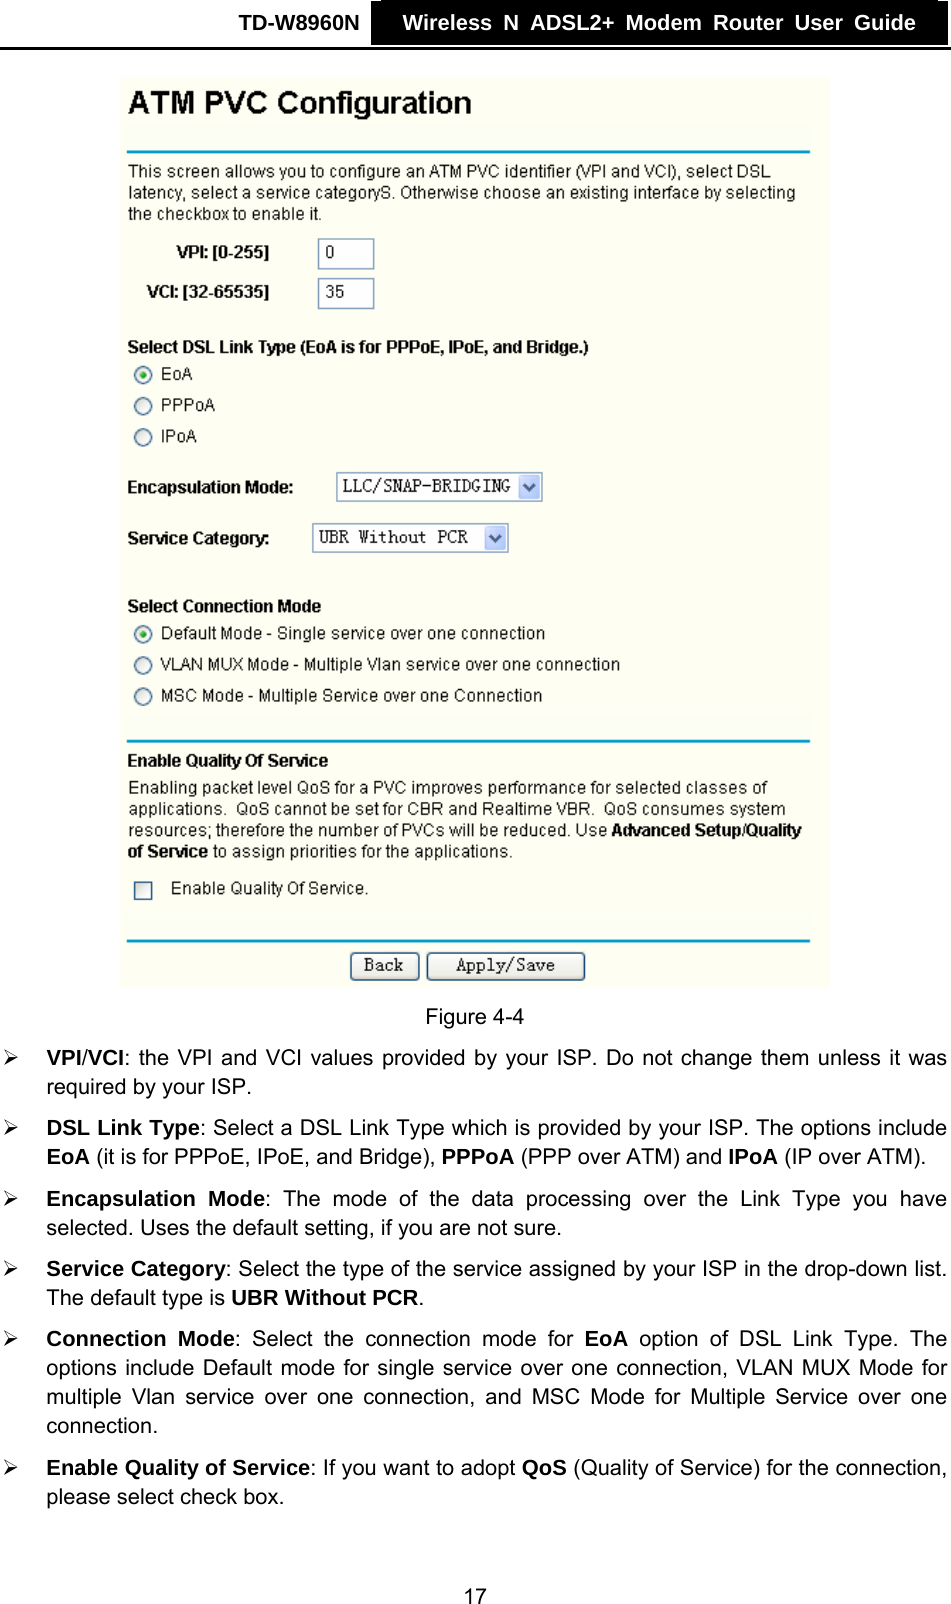 TD-W8960N    Wireless N ADSL2+ Modem Router User Guide     Figure 4-4 ¾ VPI/VCI: the VPI and VCI values provided by your ISP. Do not change them unless it was required by your ISP. ¾ DSL Link Type: Select a DSL Link Type which is provided by your ISP. The options include EoA (it is for PPPoE, IPoE, and Bridge), PPPoA (PPP over ATM) and IPoA (IP over ATM). ¾ Encapsulation Mode: The mode of the data processing over the Link Type you have selected. Uses the default setting, if you are not sure. ¾ Service Category: Select the type of the service assigned by your ISP in the drop-down list. The default type is UBR Without PCR. ¾ Connection Mode: Select the connection mode for EoA option of DSL Link Type. The options include Default mode for single service over one connection, VLAN MUX Mode for multiple Vlan service over one connection, and MSC Mode for Multiple Service over one connection.   ¾ Enable Quality of Service: If you want to adopt QoS (Quality of Service) for the connection, please select check box. 17 